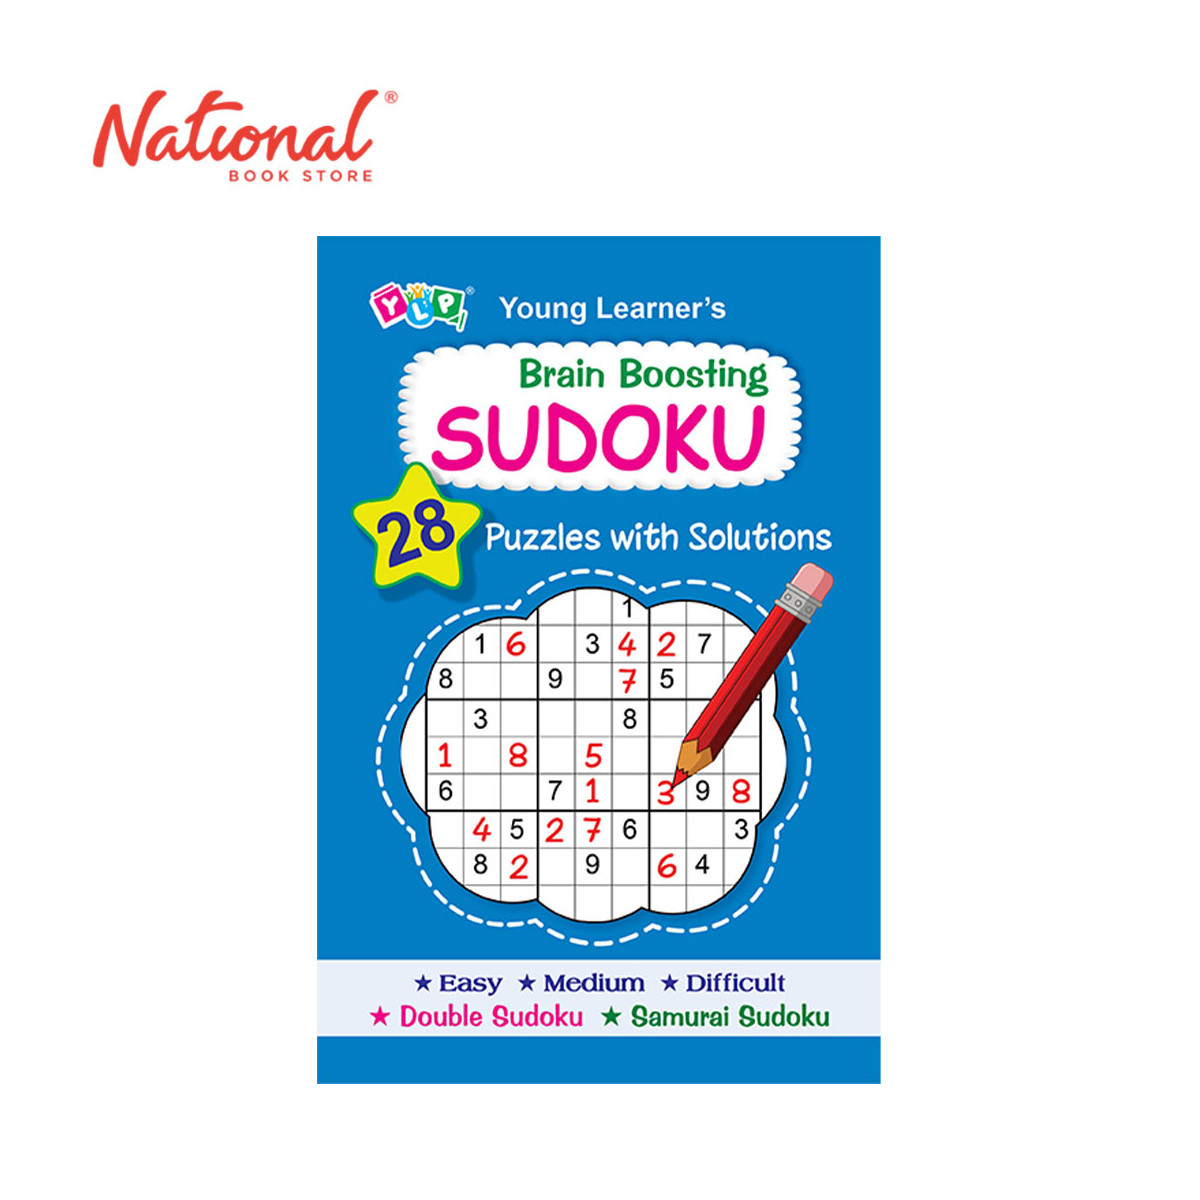 Young Learner's: Brain Boosting Sudoku - Trade Paperback - Hobbies for Kids - Puzzles for Kids